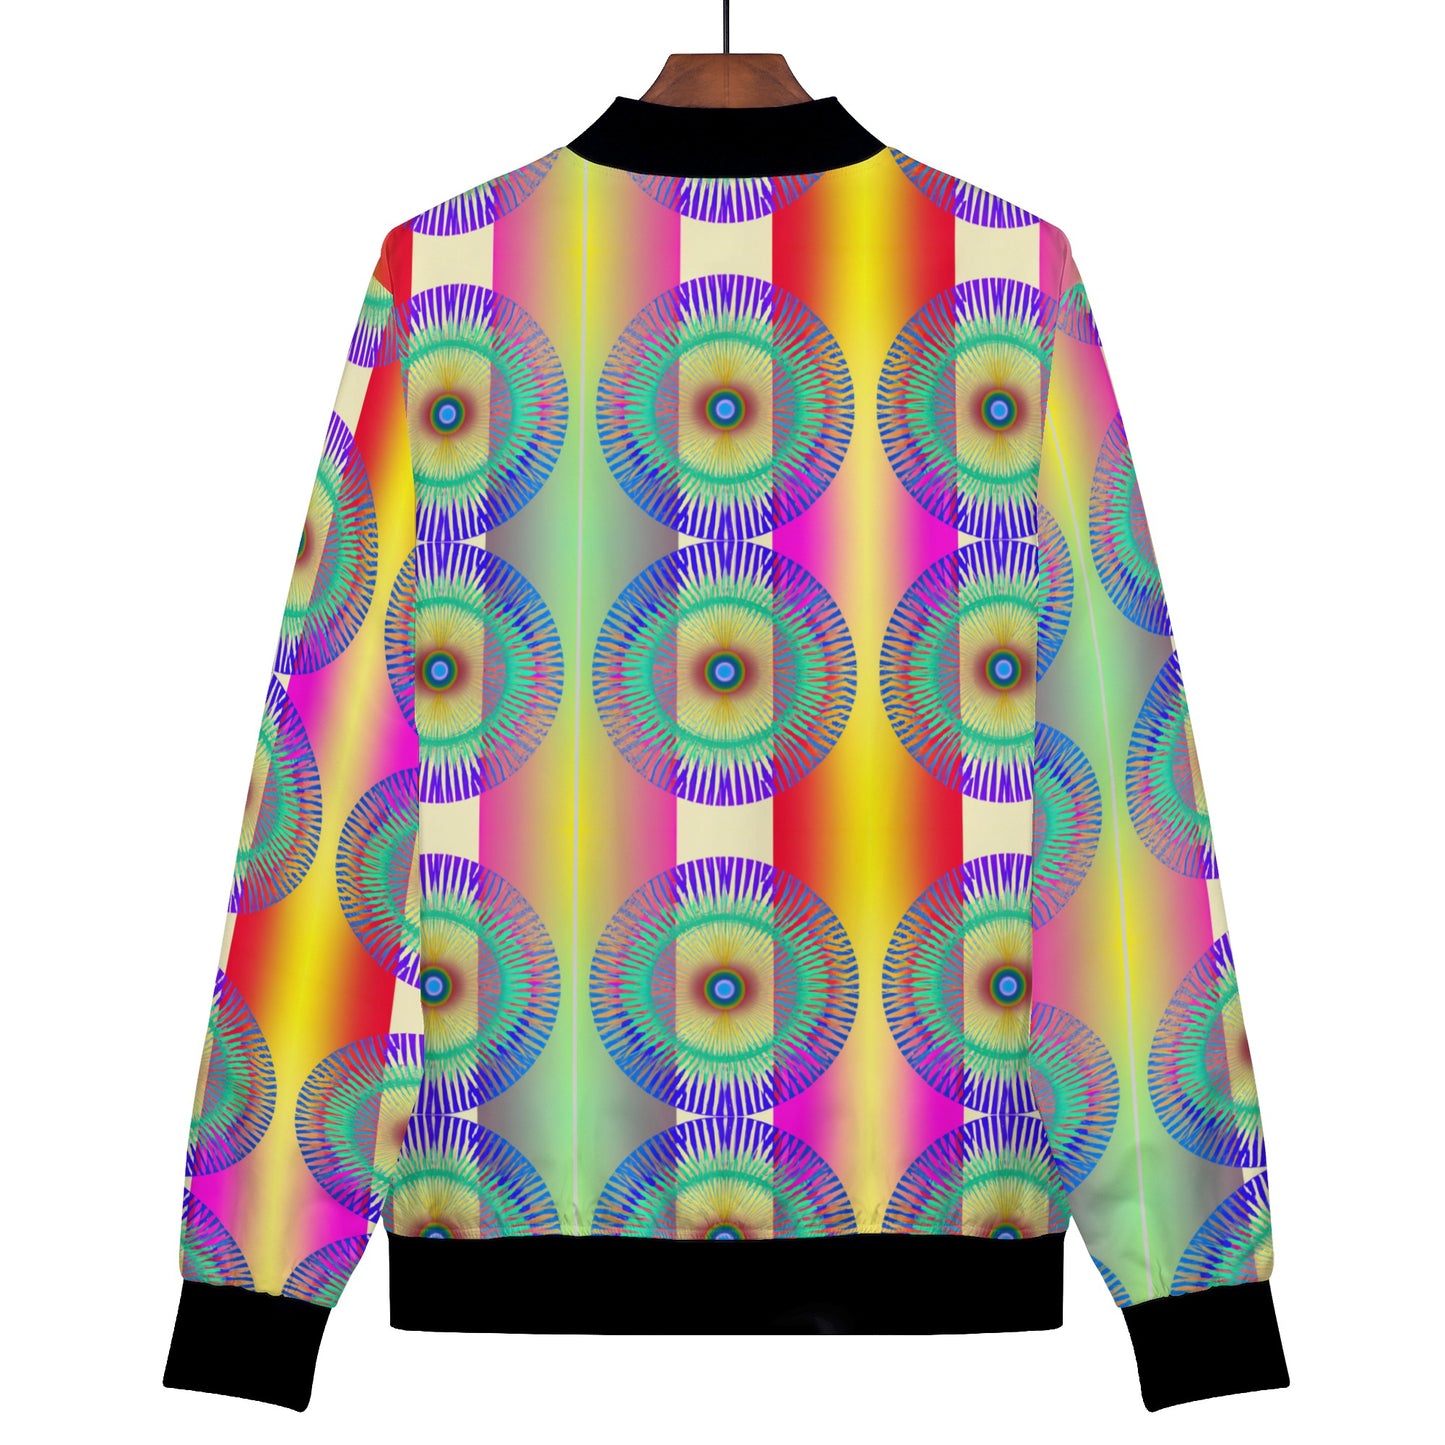 Be seen in this cool jacket and get ready to make heads turn wherever you go. Embrace your individuality and express your vibrant personality with the Psychedelia Iris Women's Bomber Jacket.